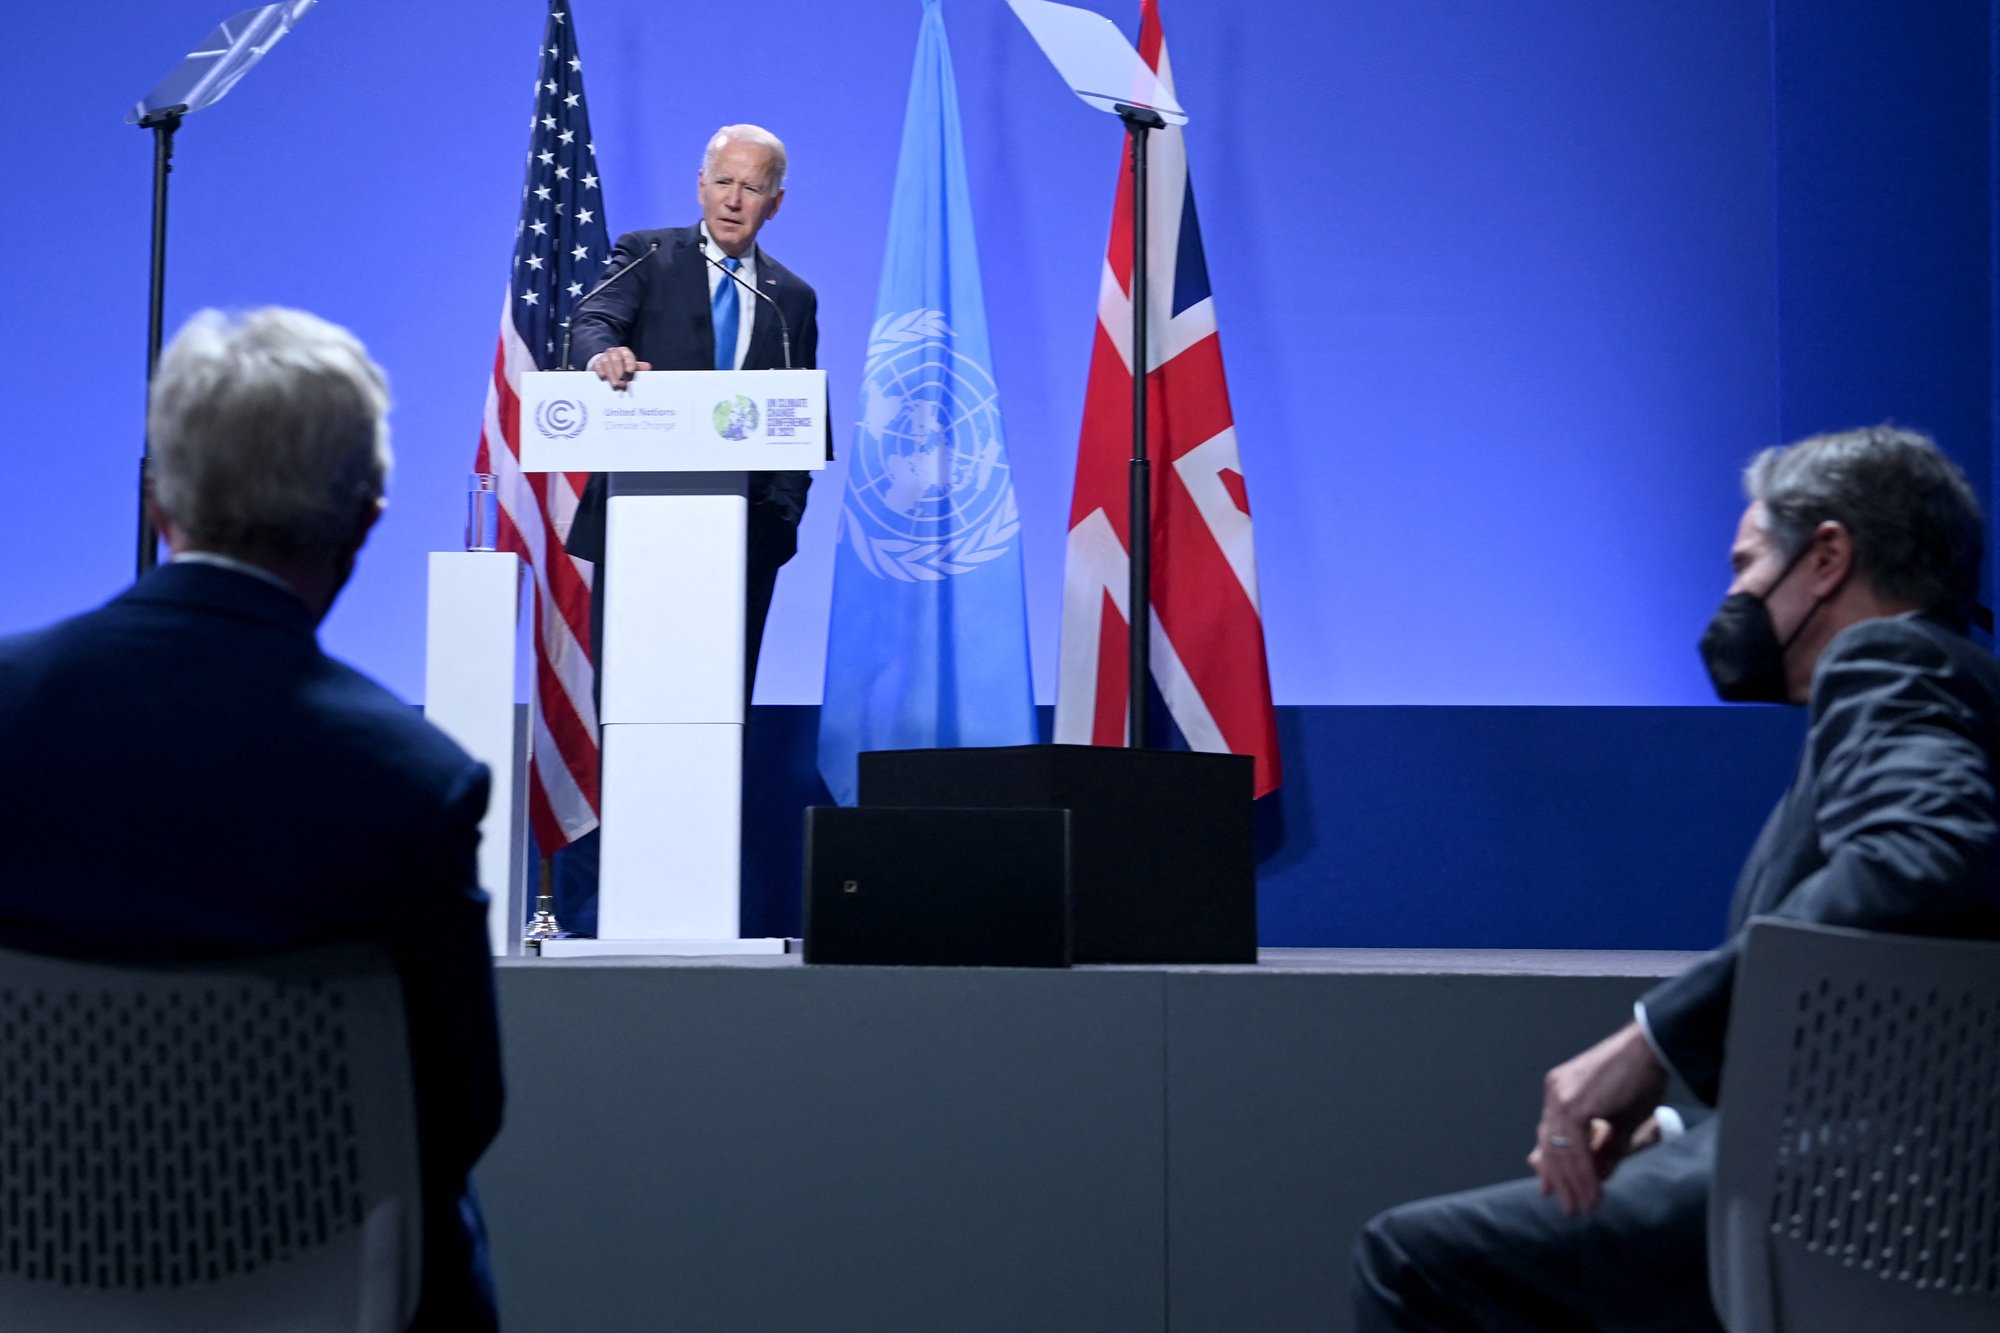 Biden asked Chen and Putin not to attend the climate summit